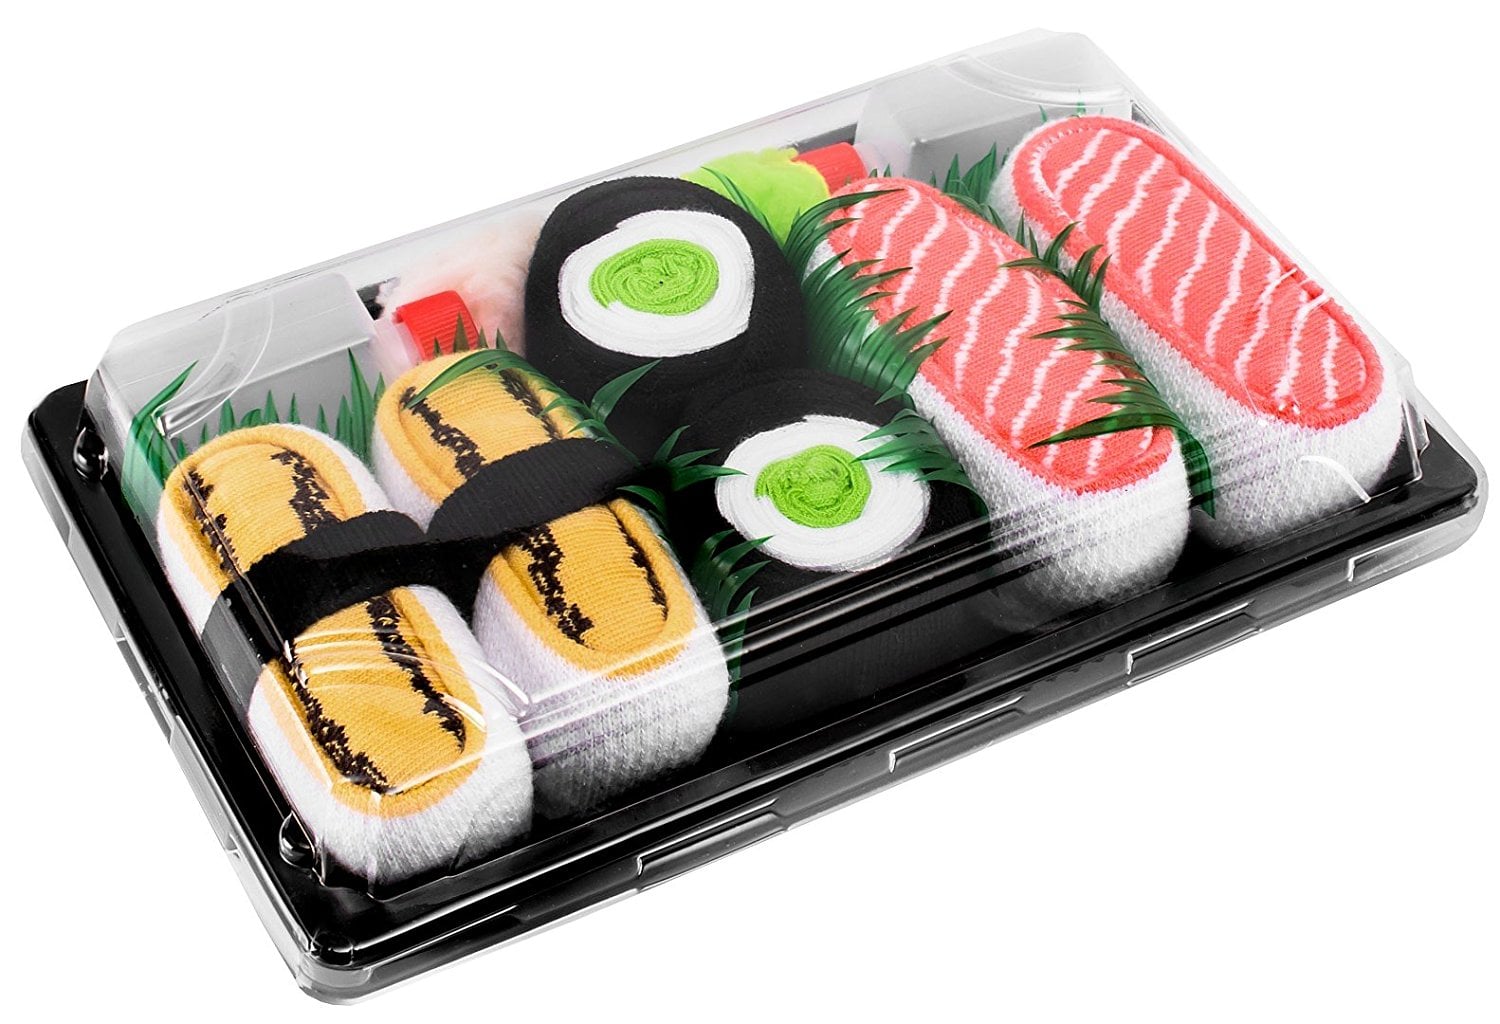 Japanese Food Cuisine Gift Sushi Is Cheaper Than Therapy Funny